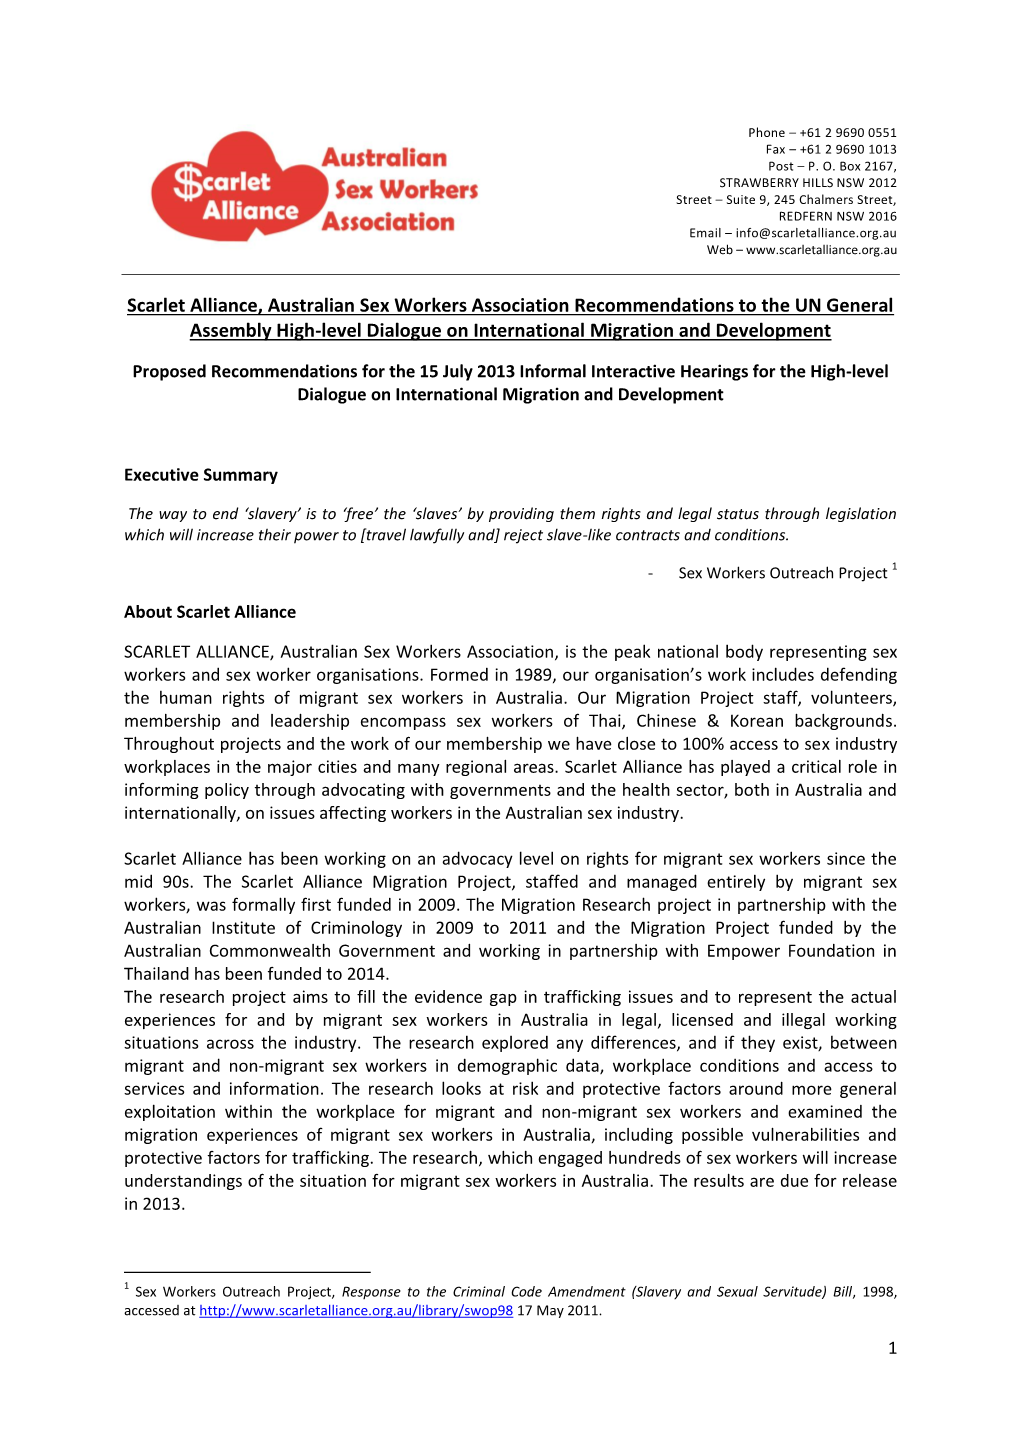 Scarlet Alliance, Australian Sex Workers Association Recommendations to the UN General Assembly High-Level Dialogue on International Migration and Development